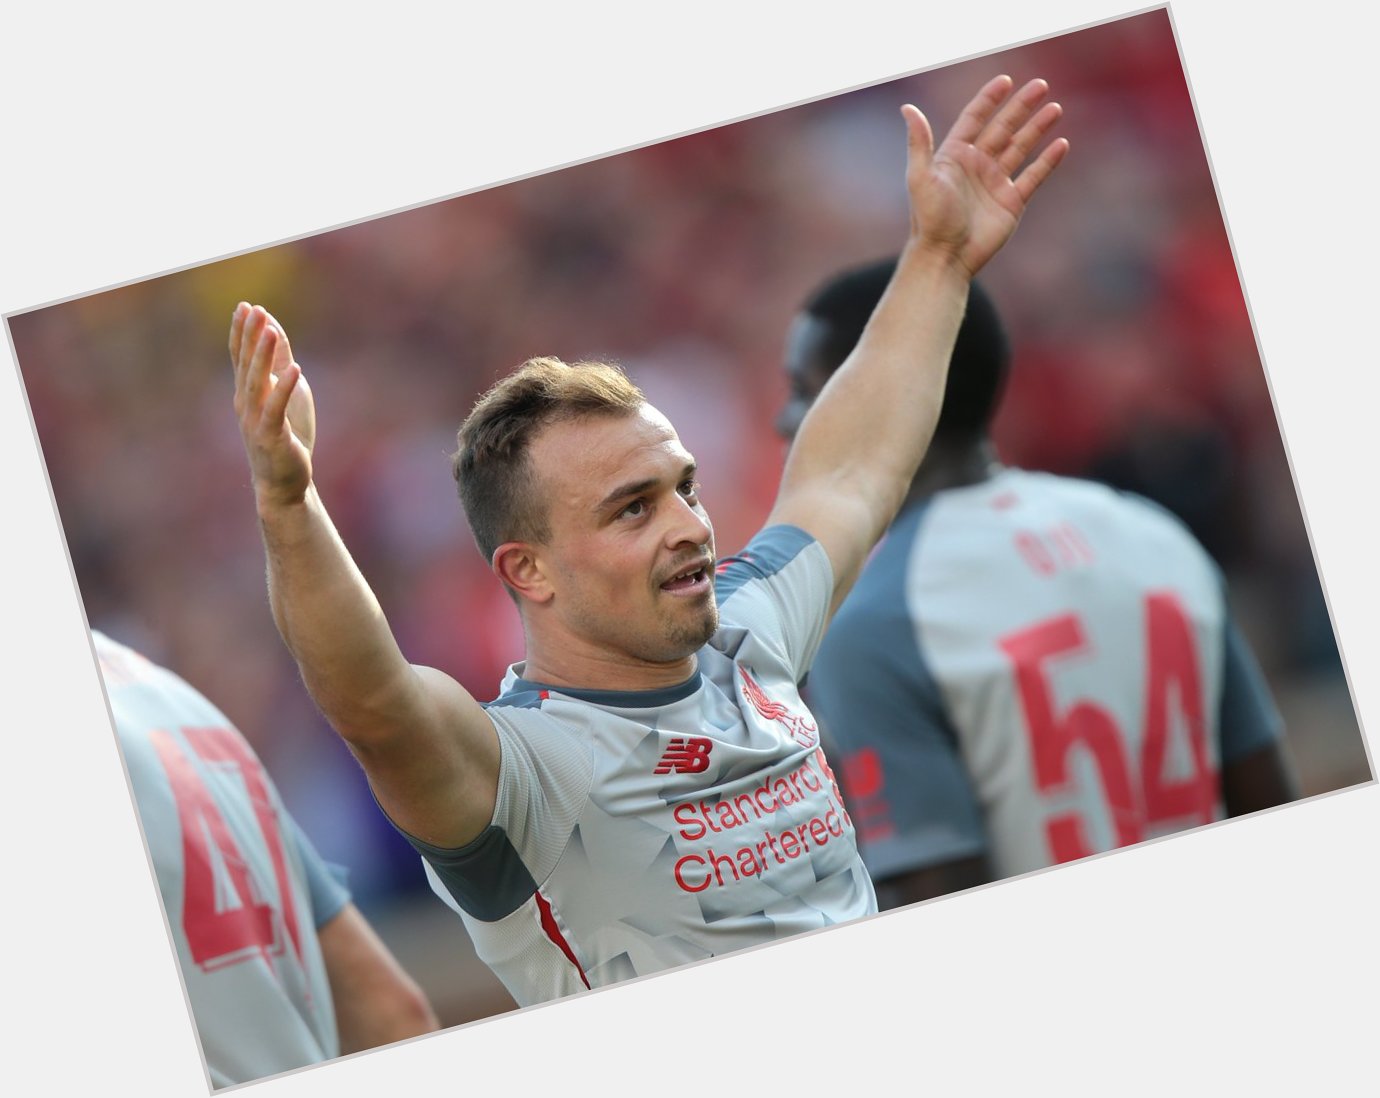  Happy Birthday to our new no.23 Xherdan Shaqiri, who is 27 today. Have a boss one, la! 